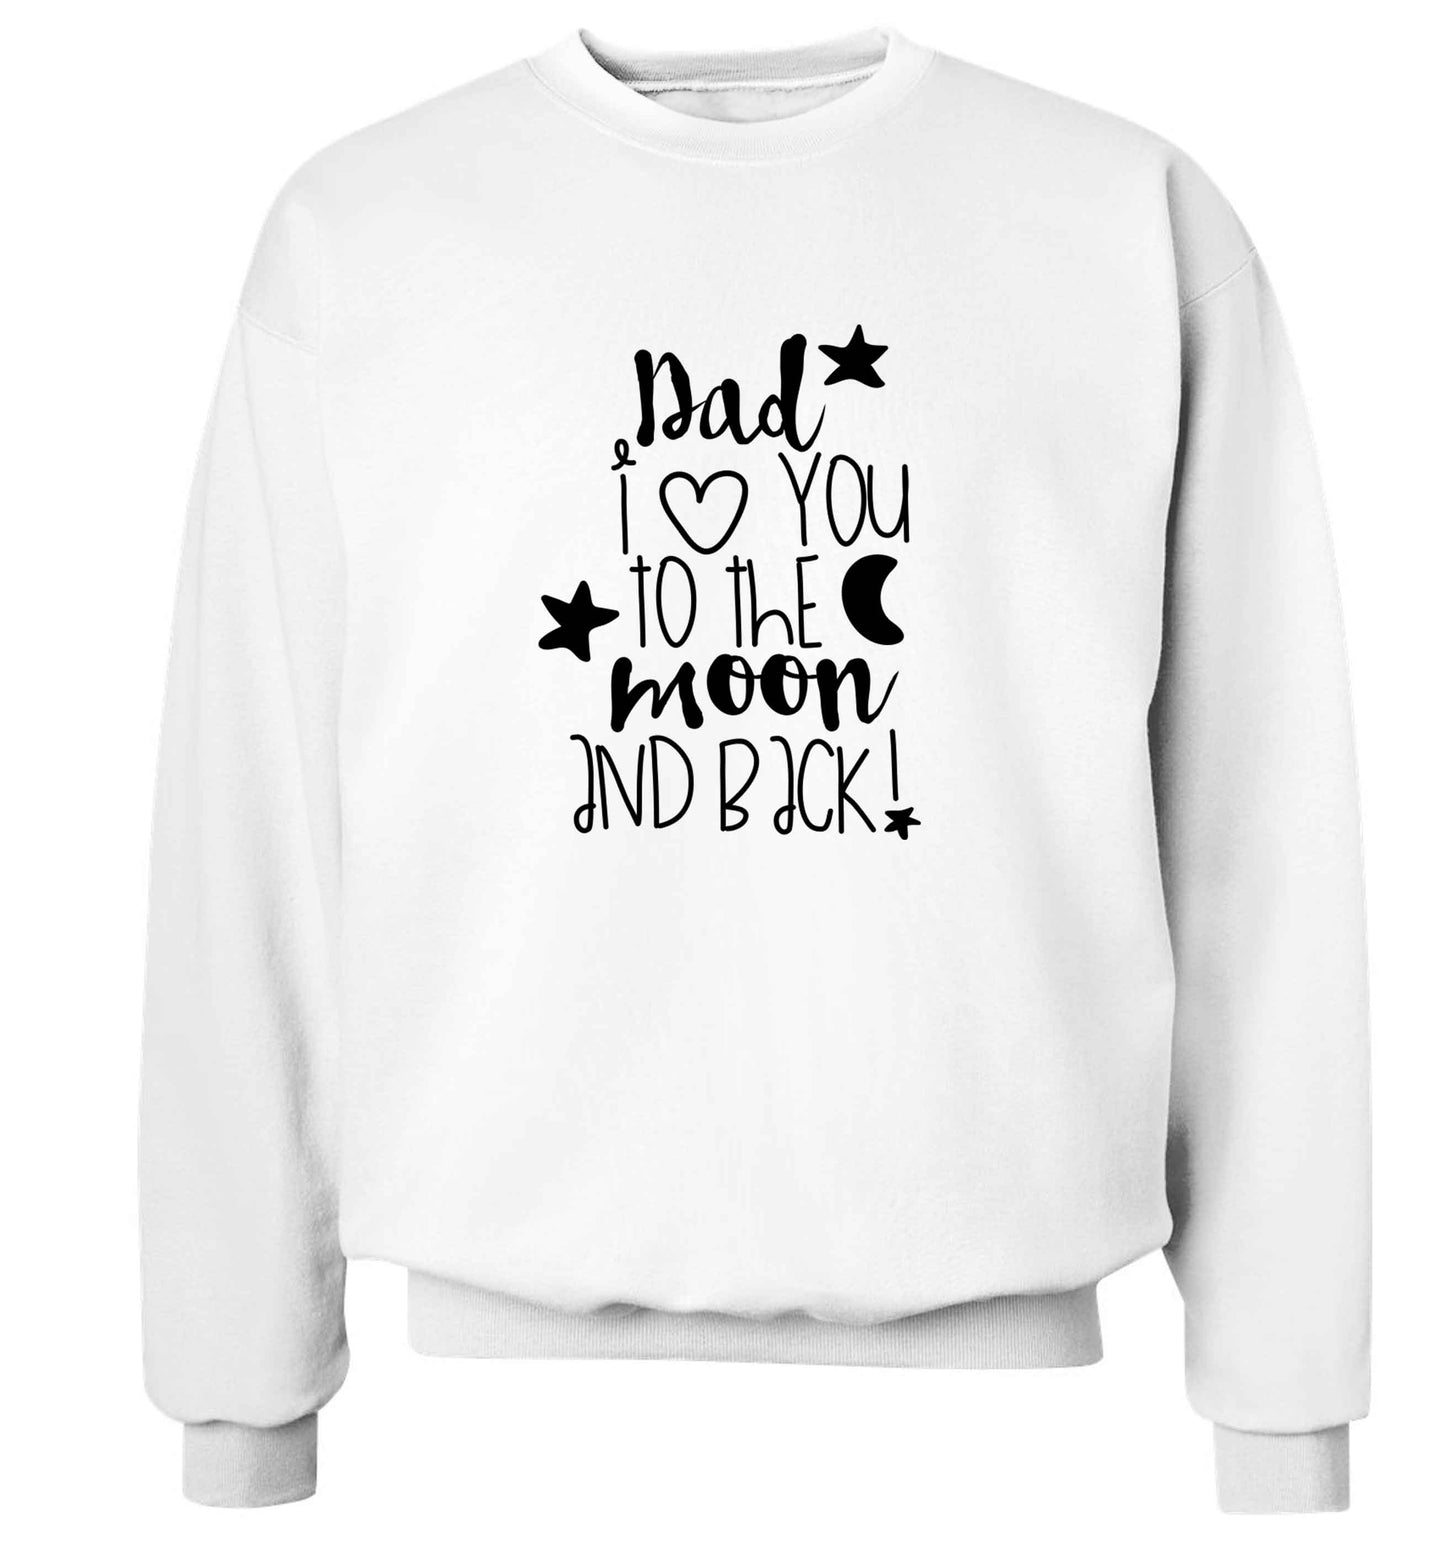 Dad I love you to the moon and back adult's unisex white sweater 2XL